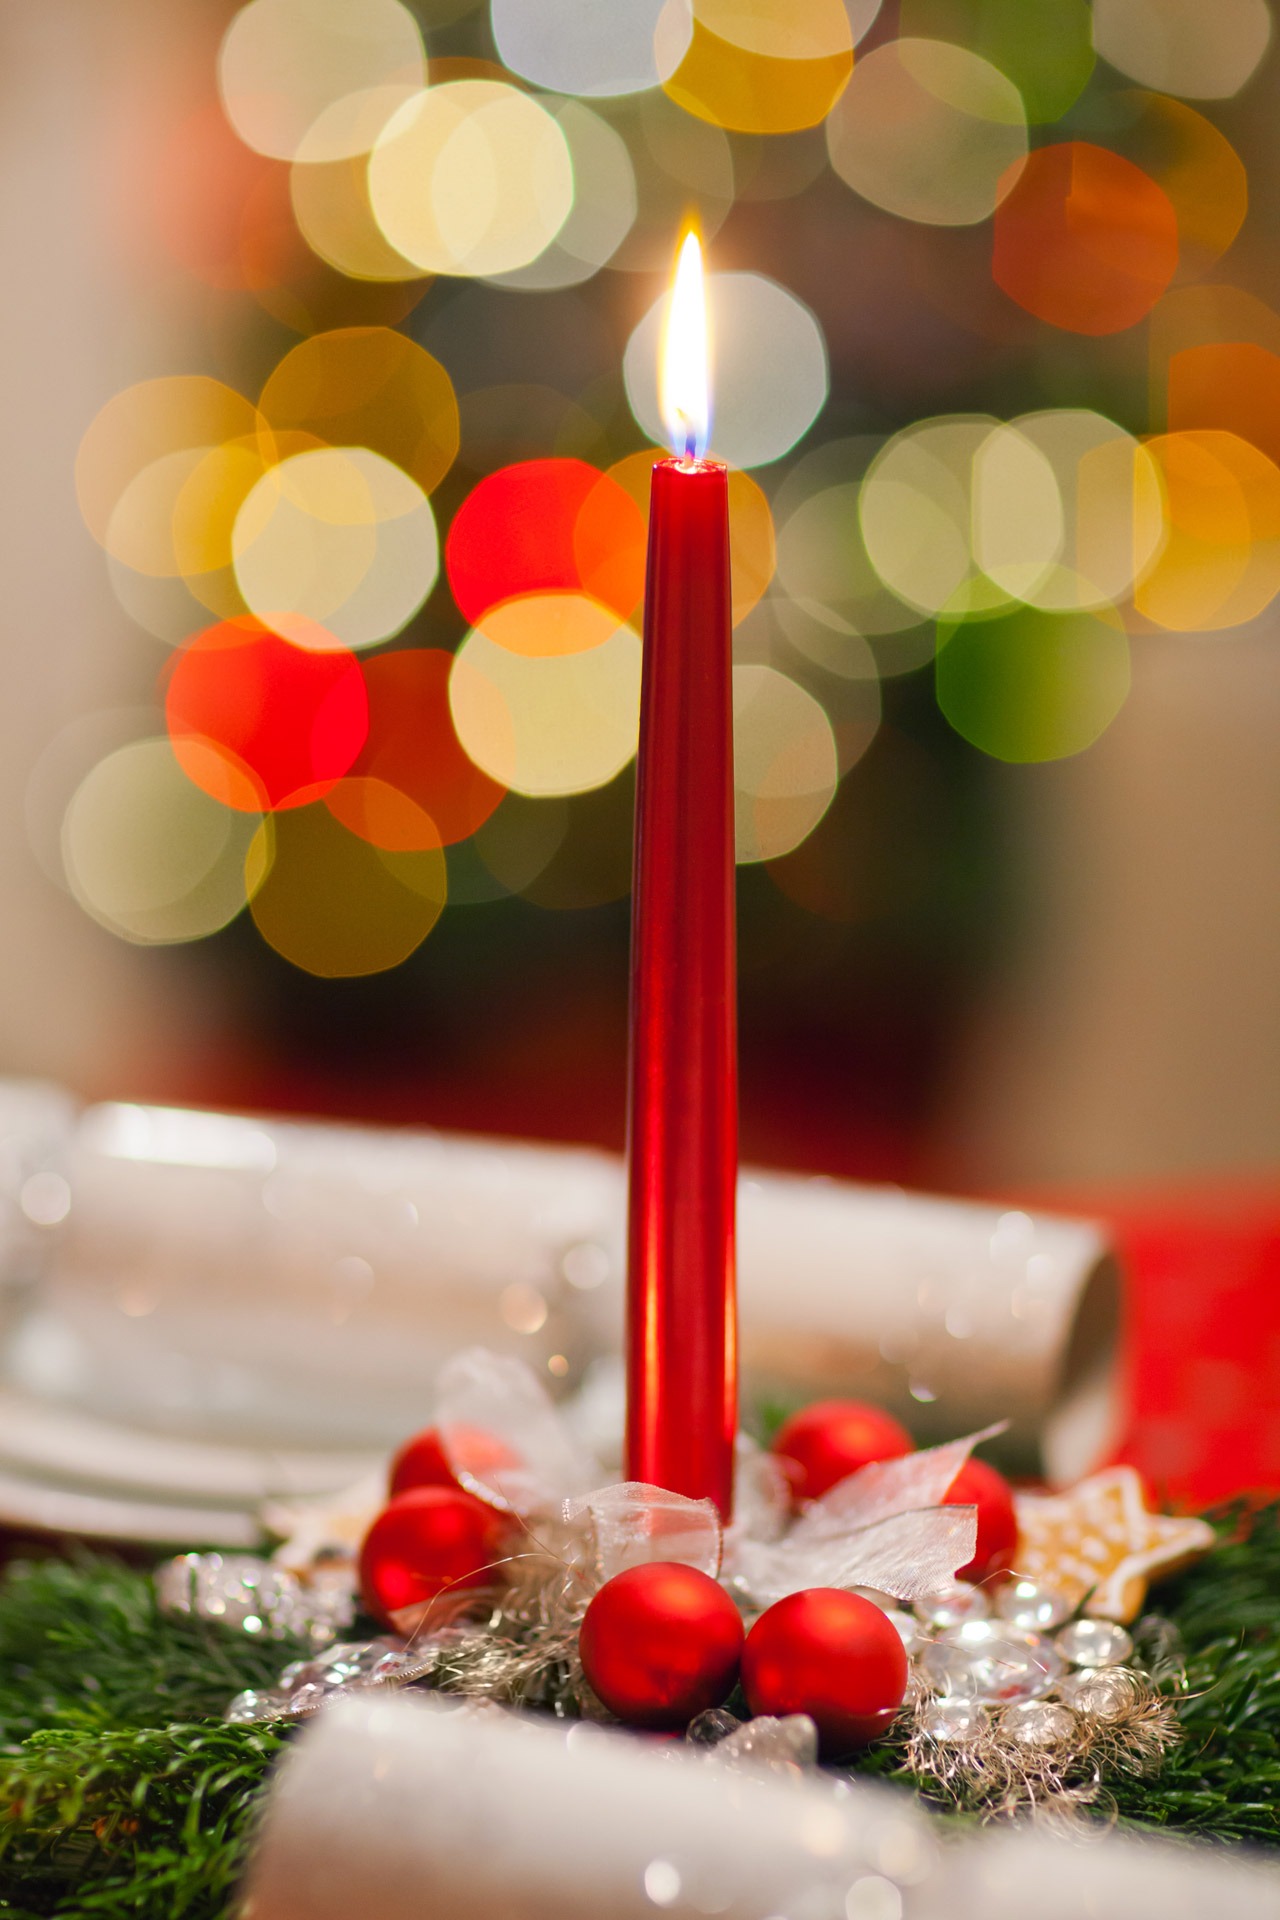 Advent Candle Celebration free image download